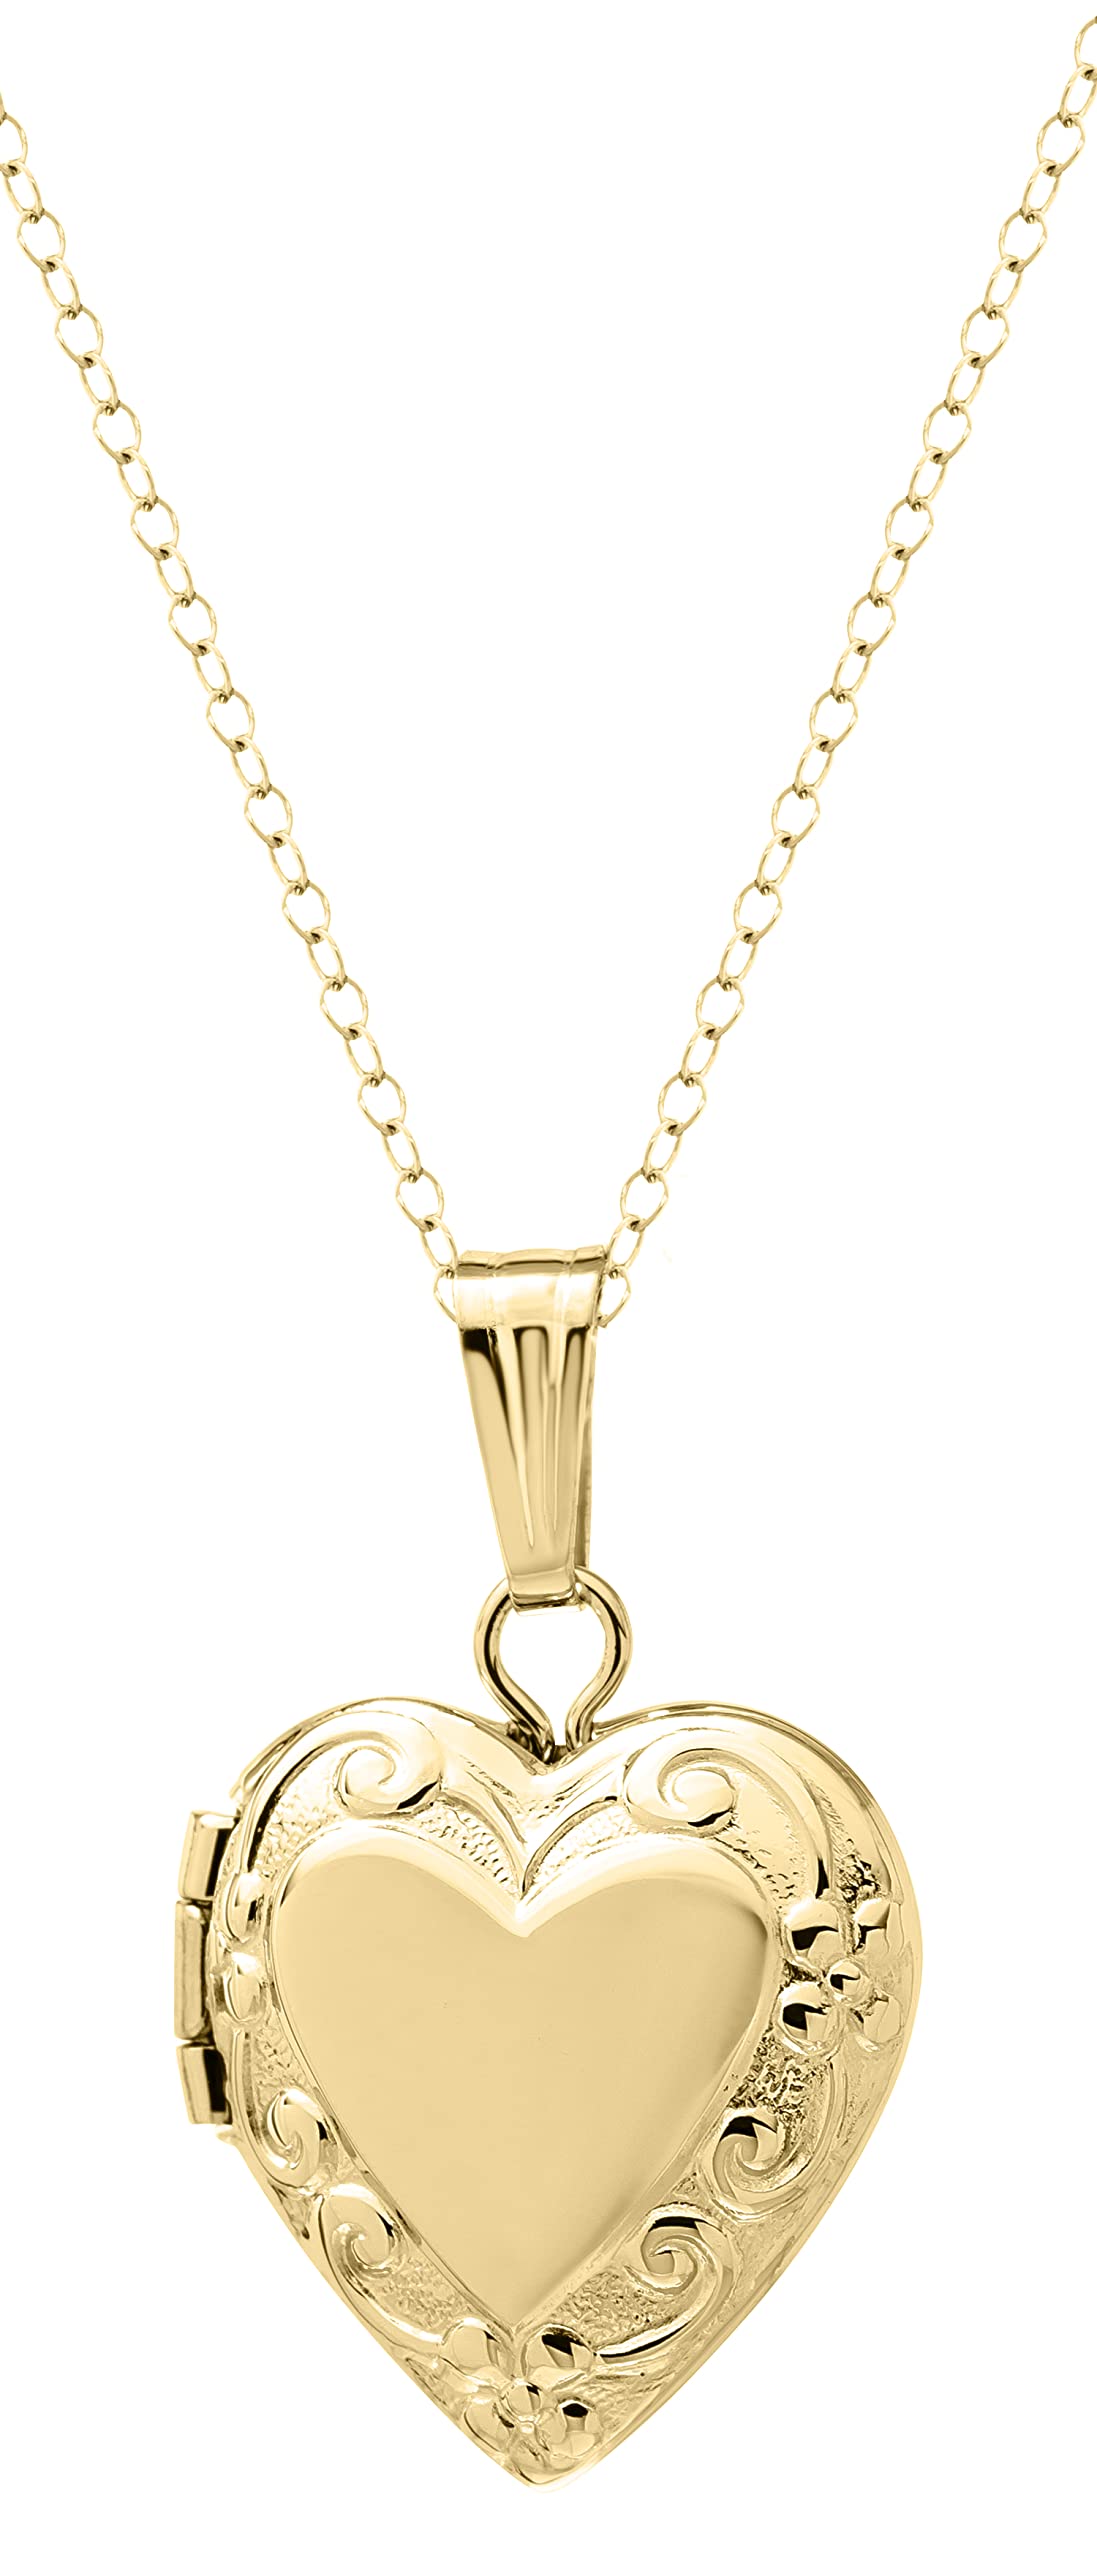 Amazon Collection Children's 14k Yellow Gold-Filled Heart Locket Pendant Necklace, 15